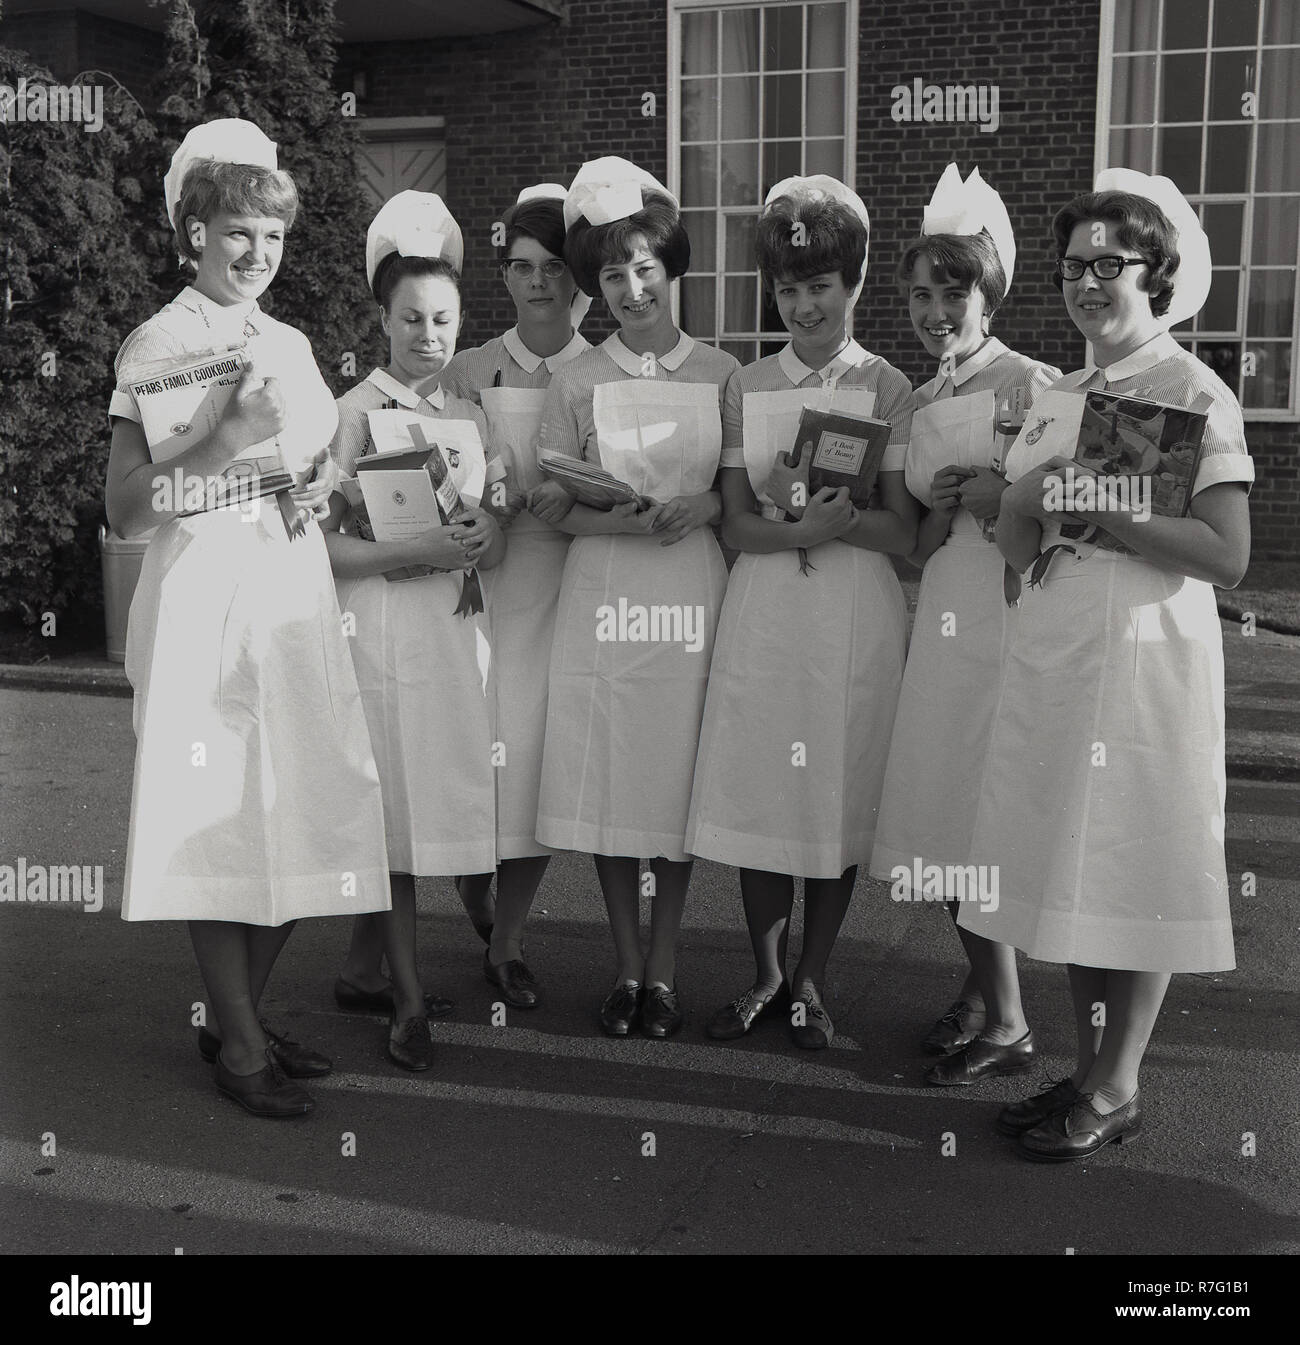 1965, group of British nurses in uniform standing together outside with their nursing certificates and prizes having taken the nursing exams and qualified, England, UK. Stock Photo